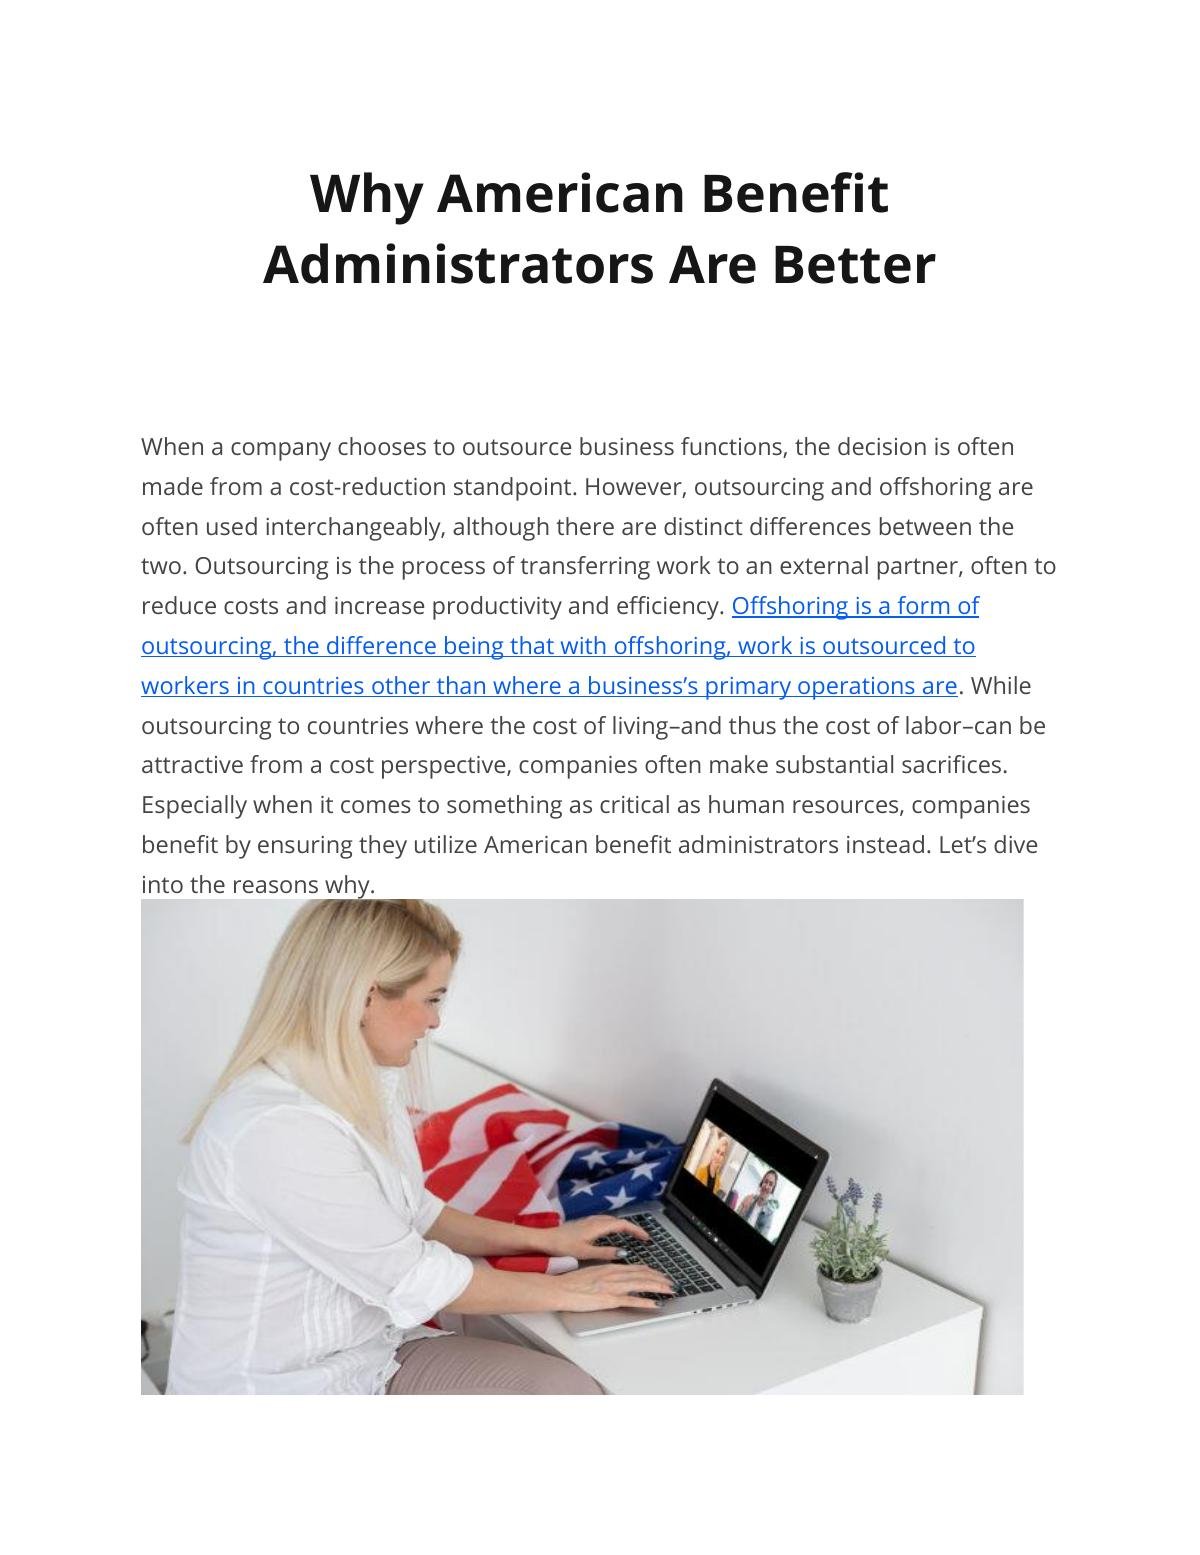 Why American Benefit Administrators Are Better